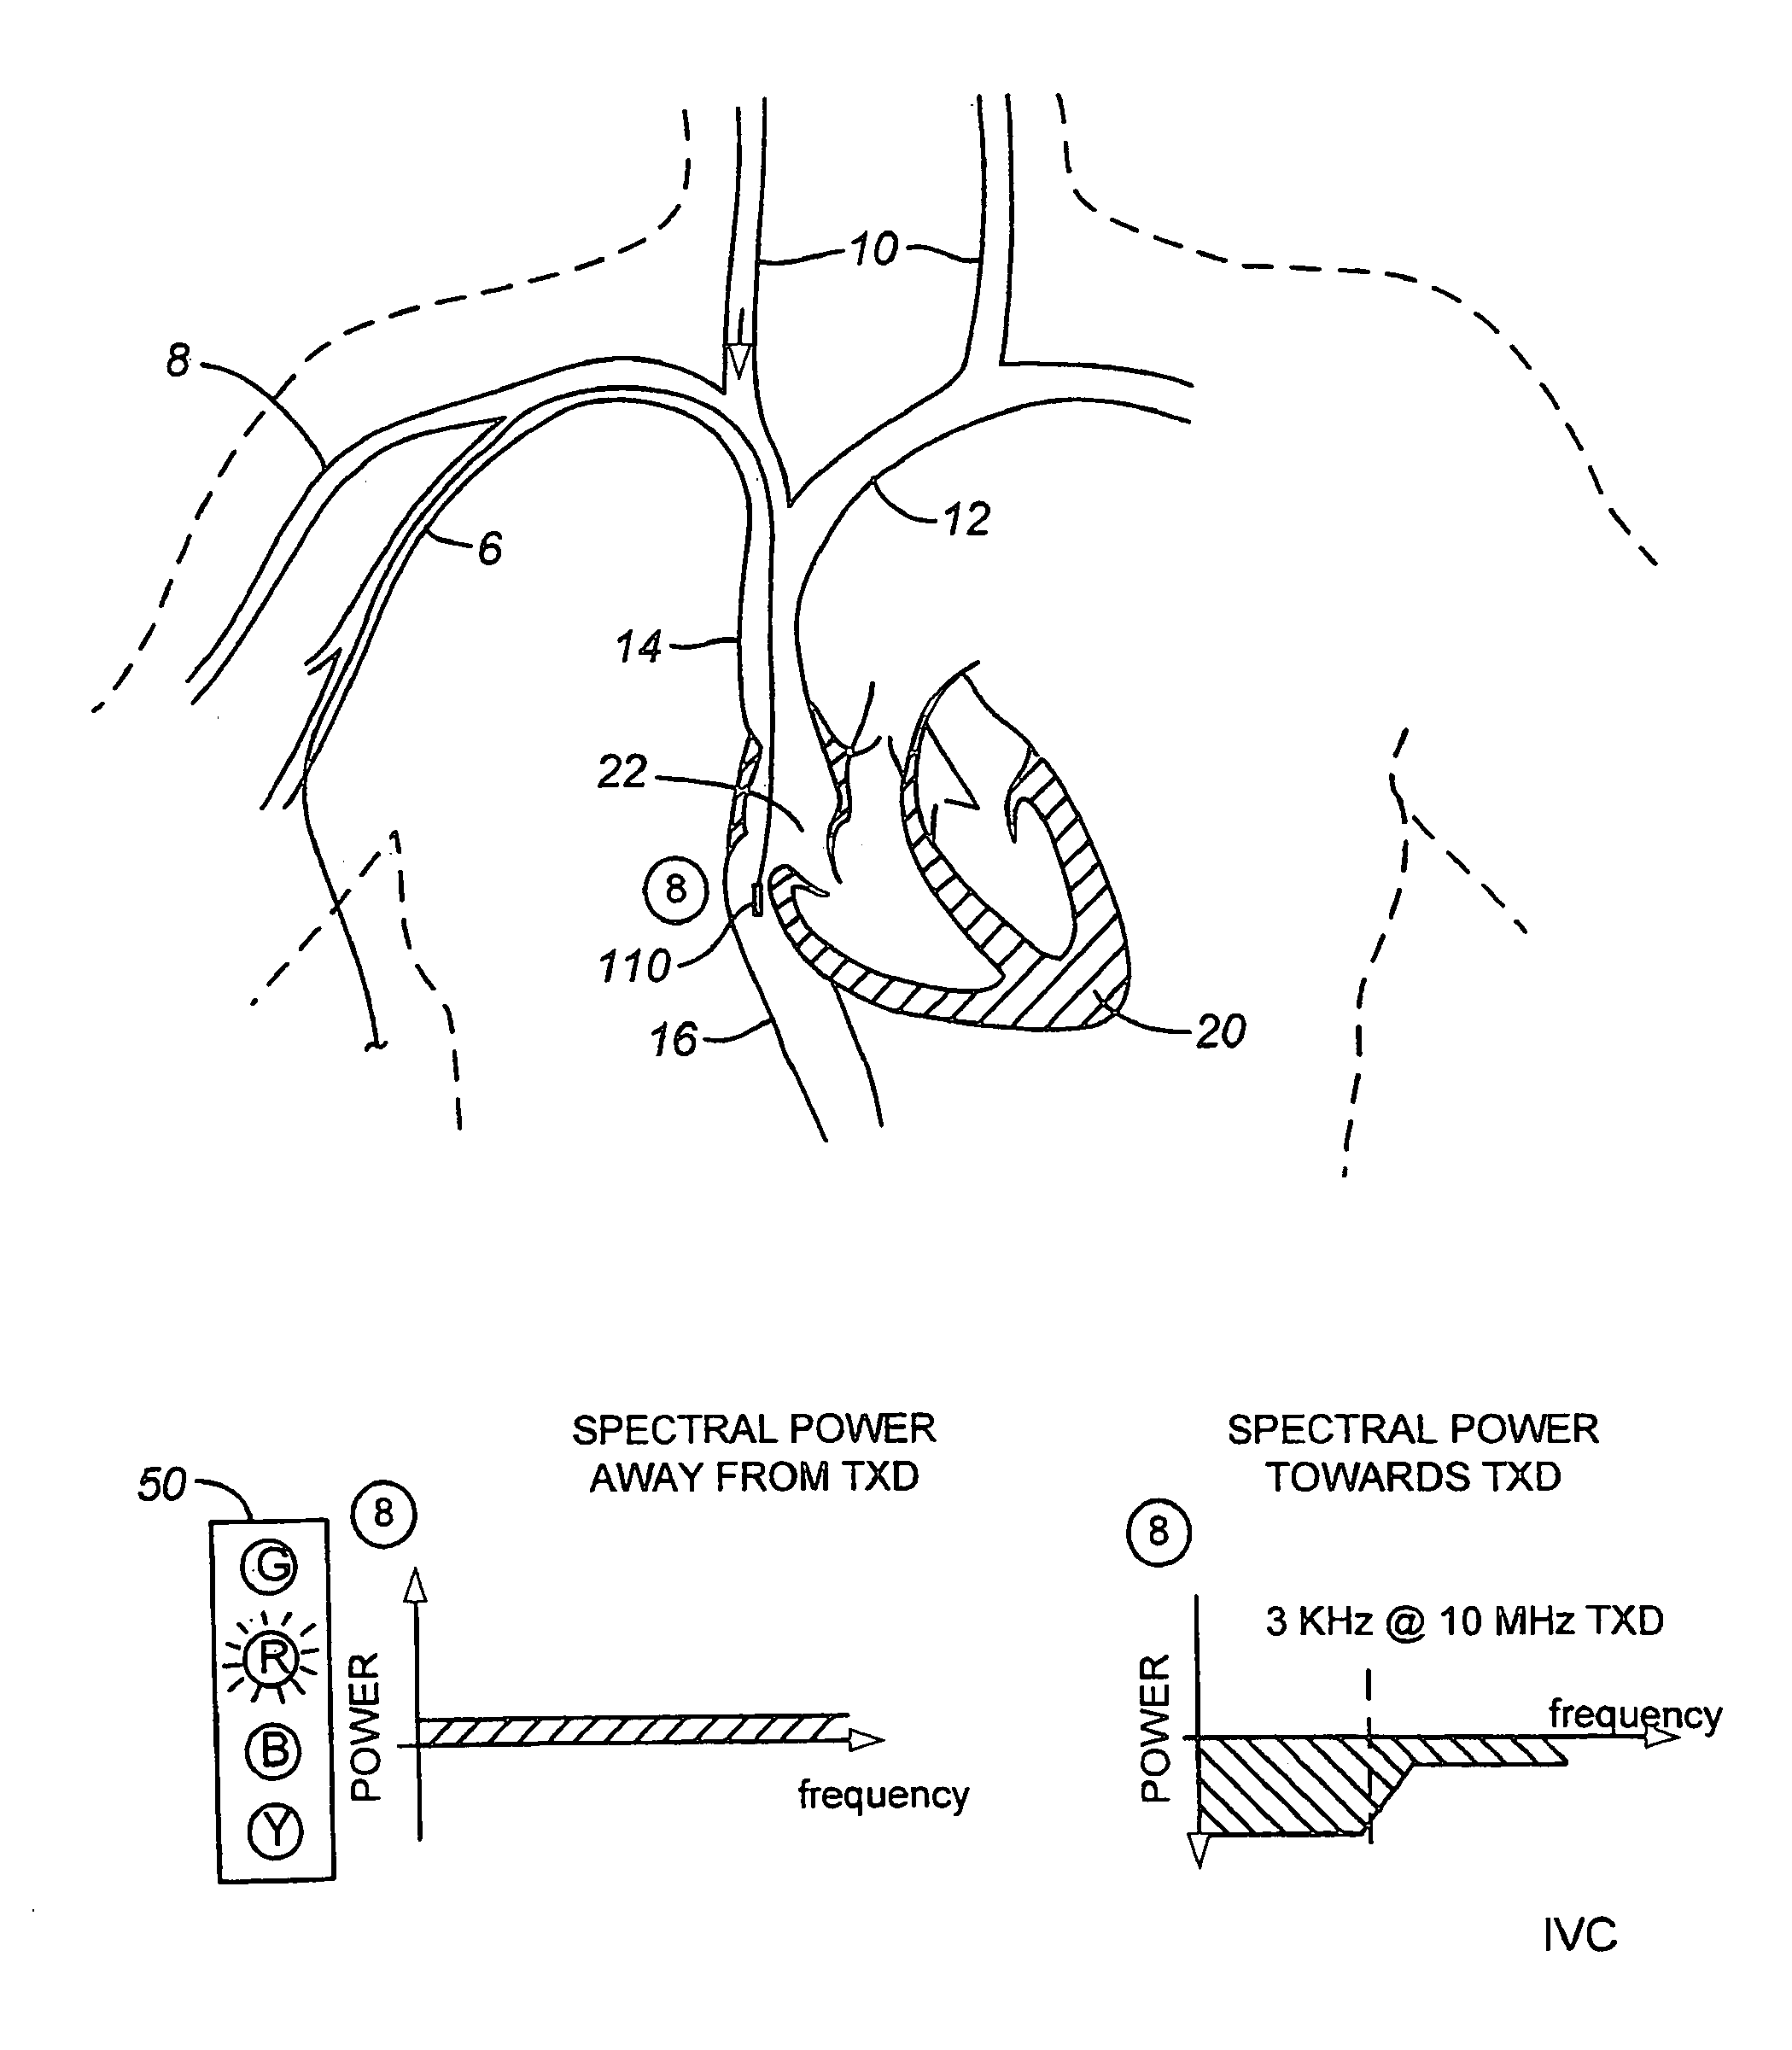 Ultrasound methods of positioning guided vascular access devices in the venous system